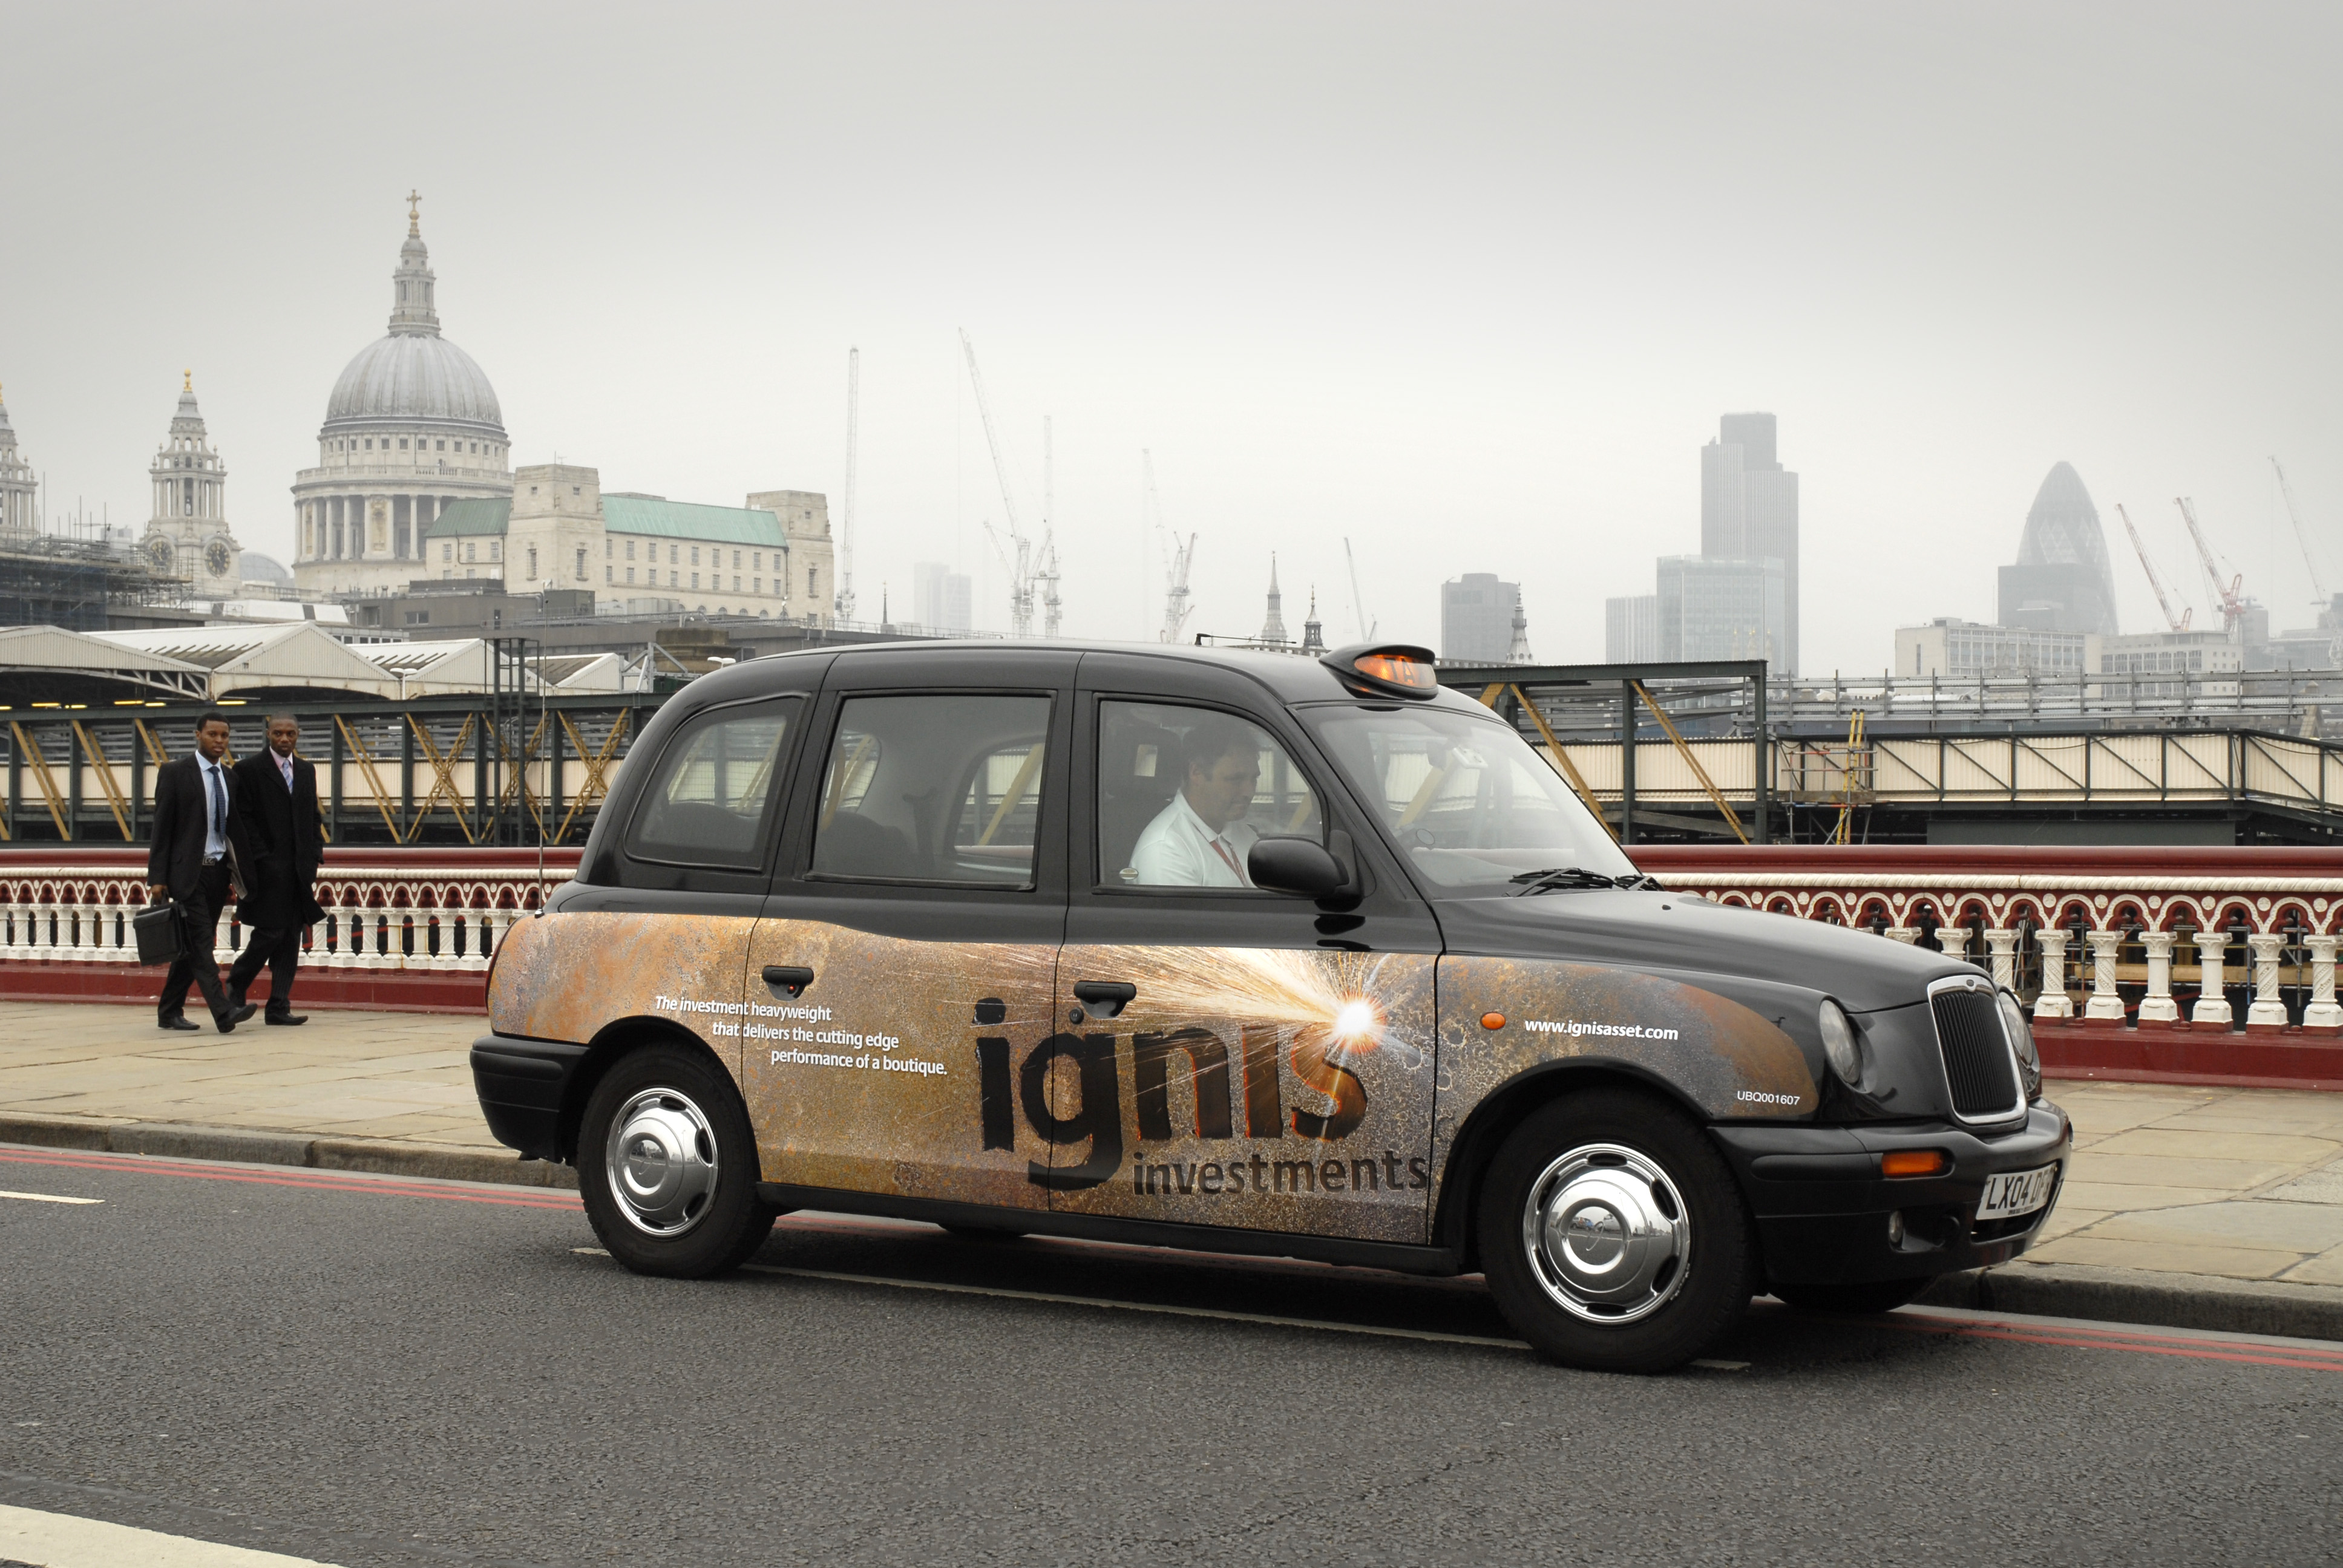 2009 Ubiquitous taxi advertising campaign for Ignis - Various